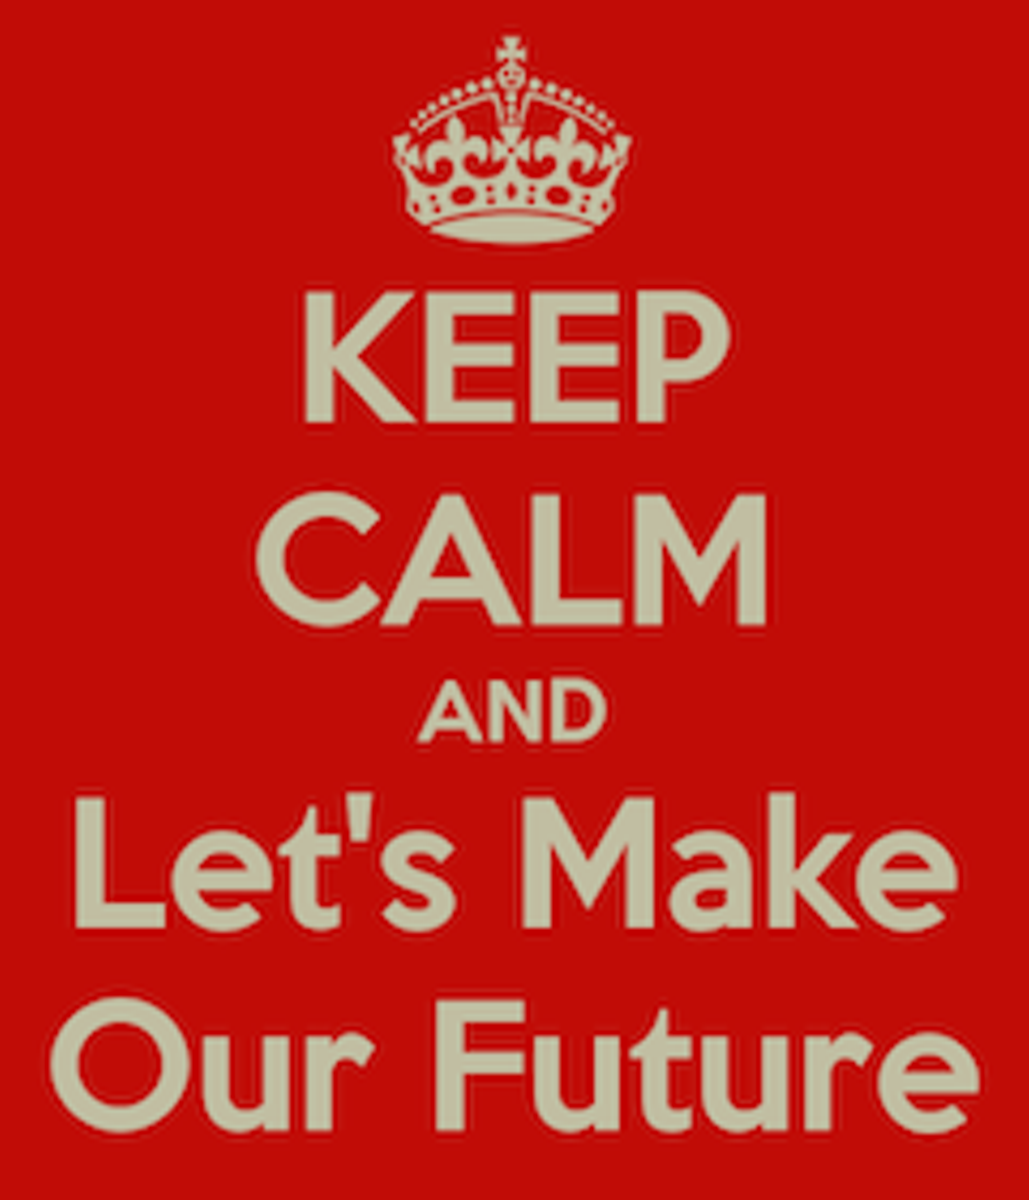 Keep calm and let's make our future